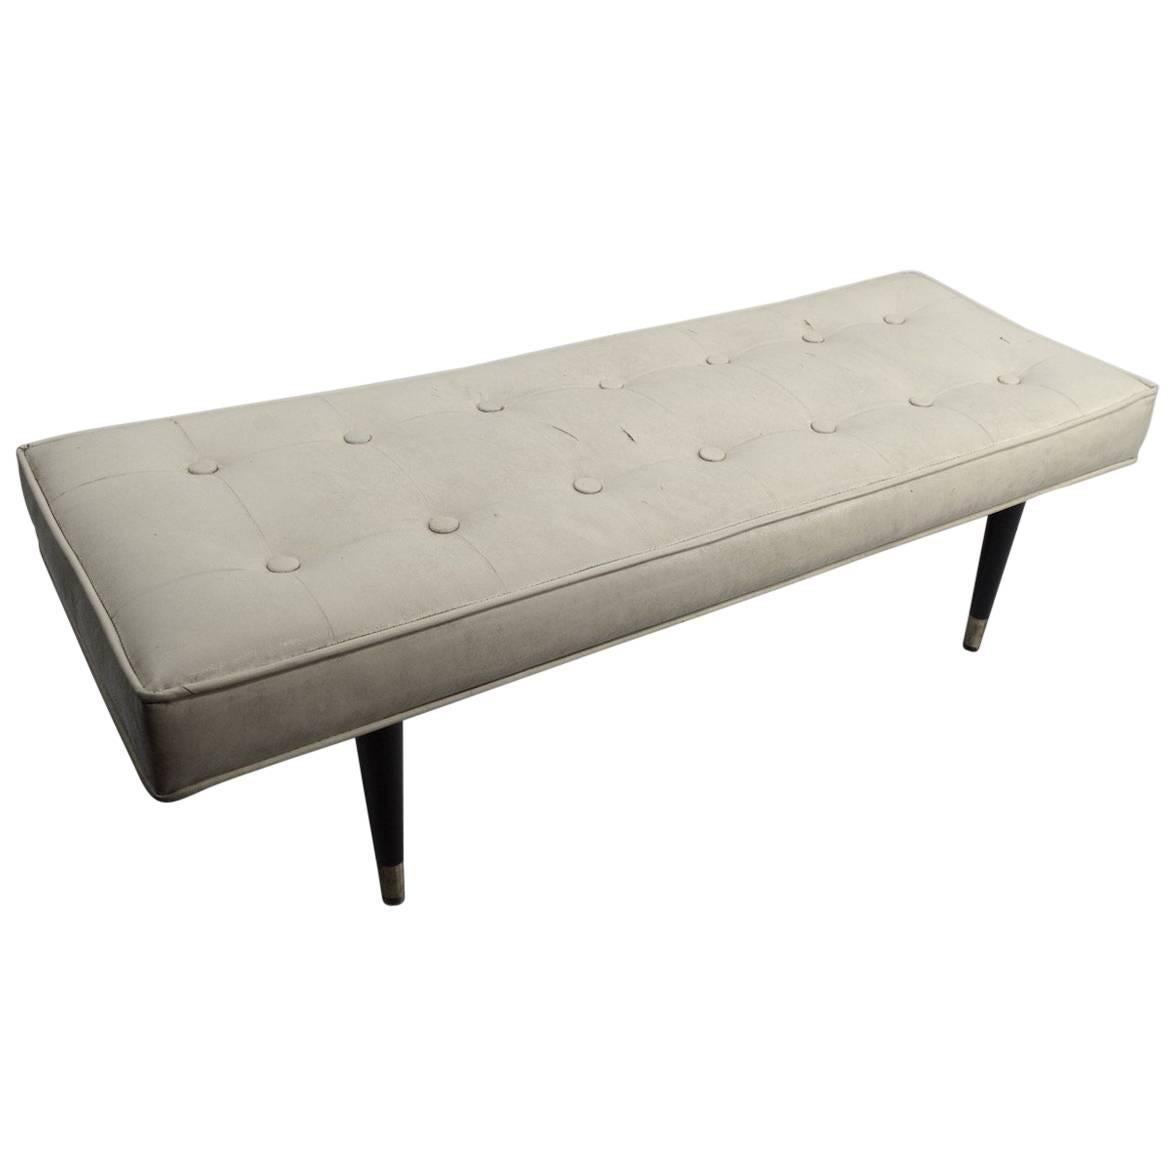 Mid-Century Bench with Tufted Upholstered Seat